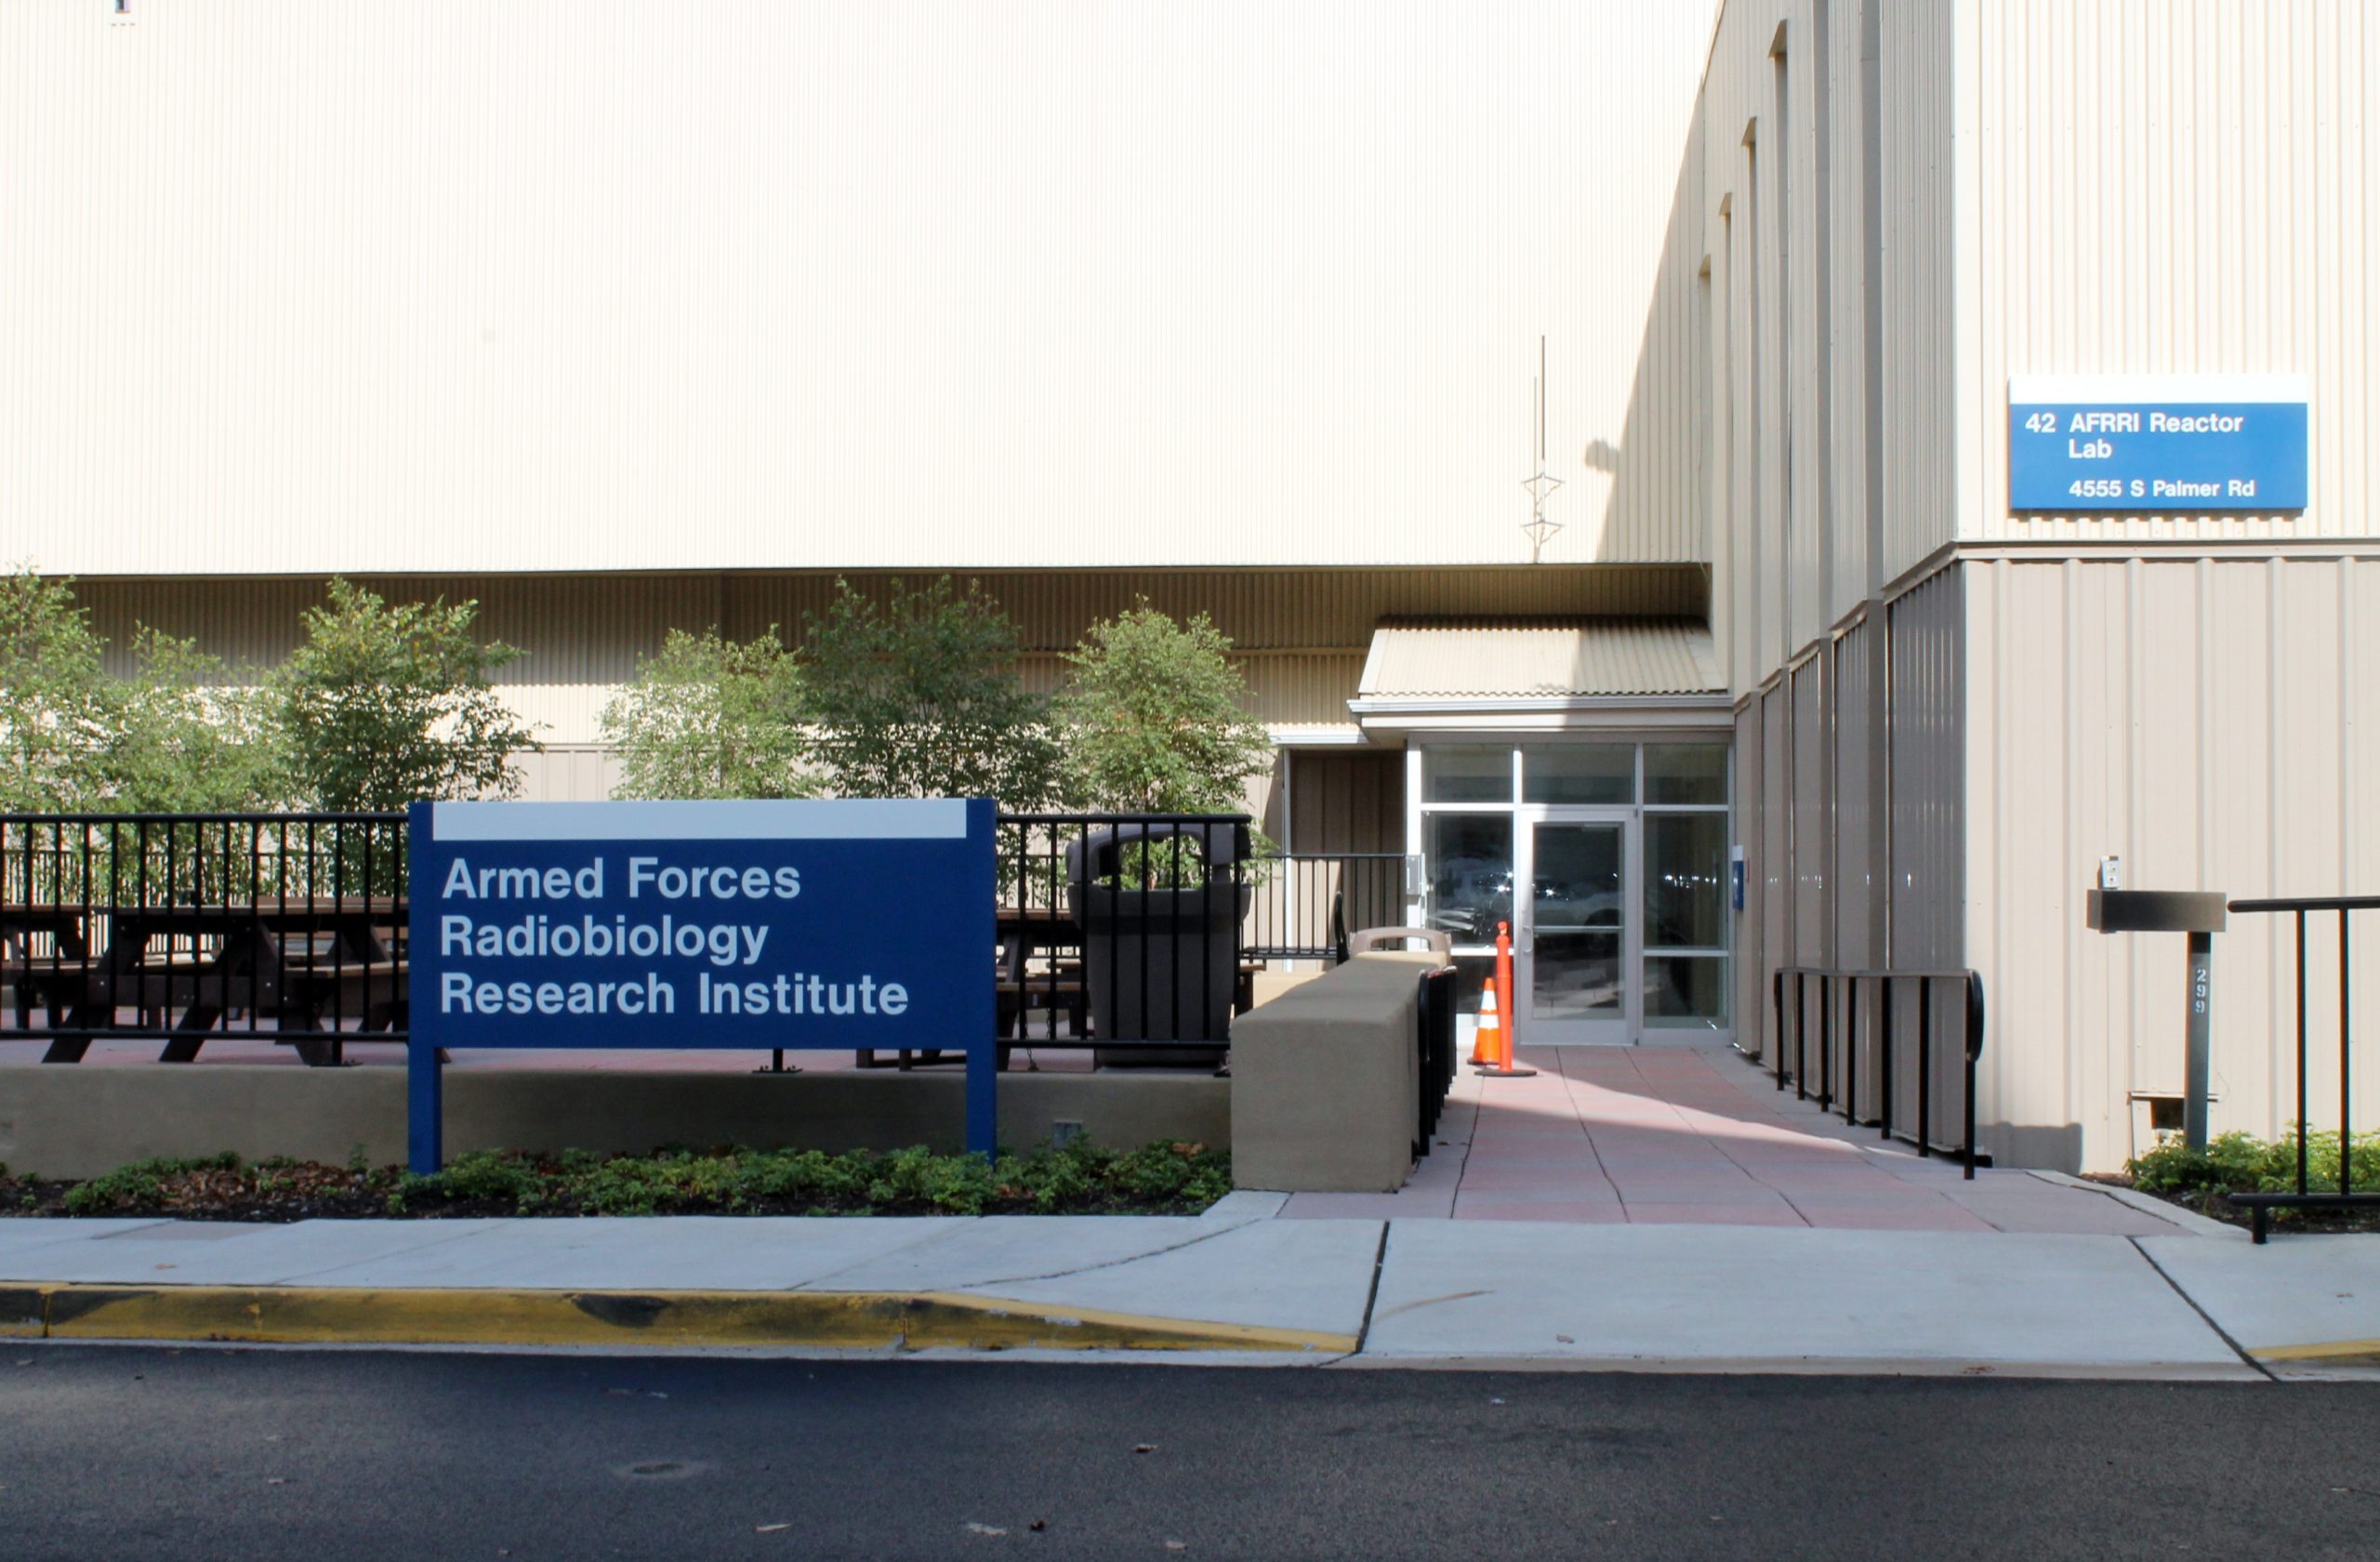 ARMED FORCES RADIOLOGICAL RESEARCH INSTITUTE